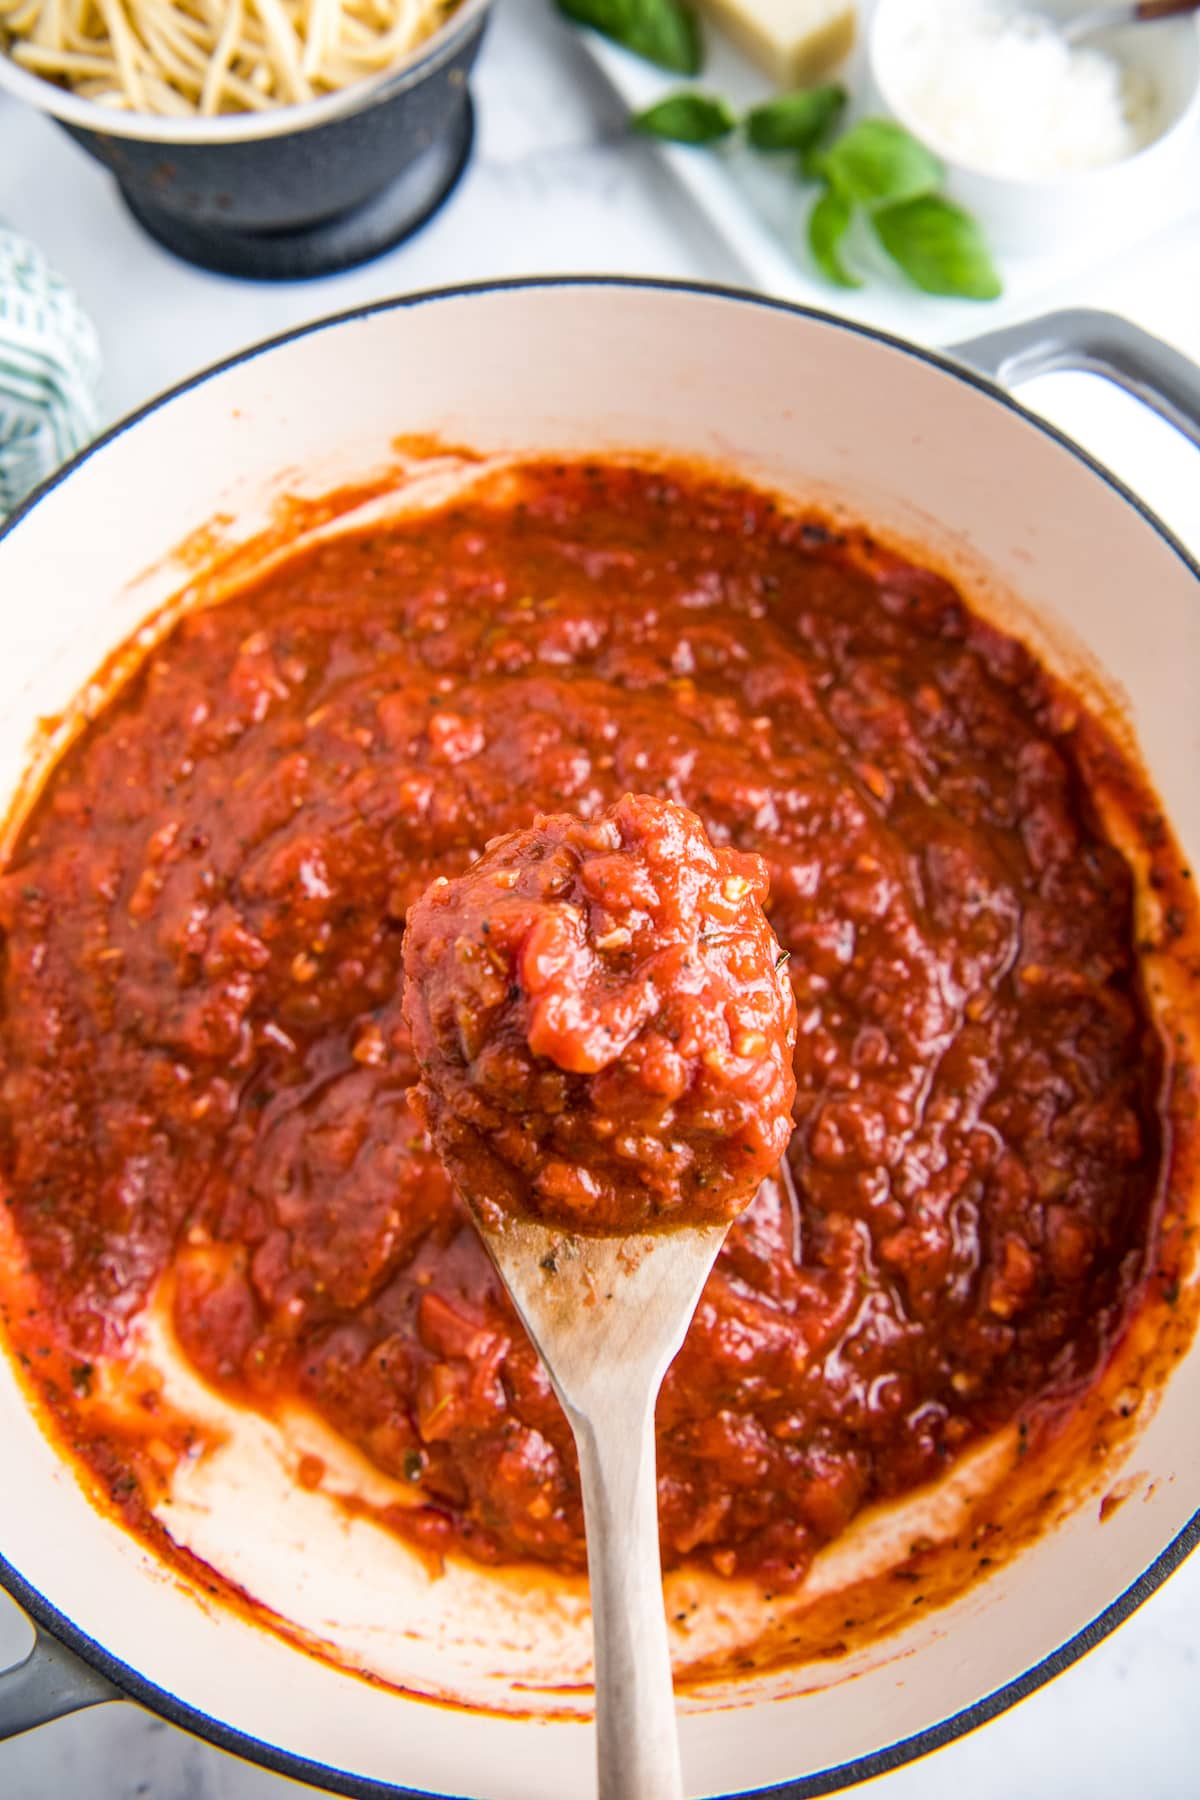 Homemade marinara sauce in a skillet with a wooden spoon scooping up some sauce.